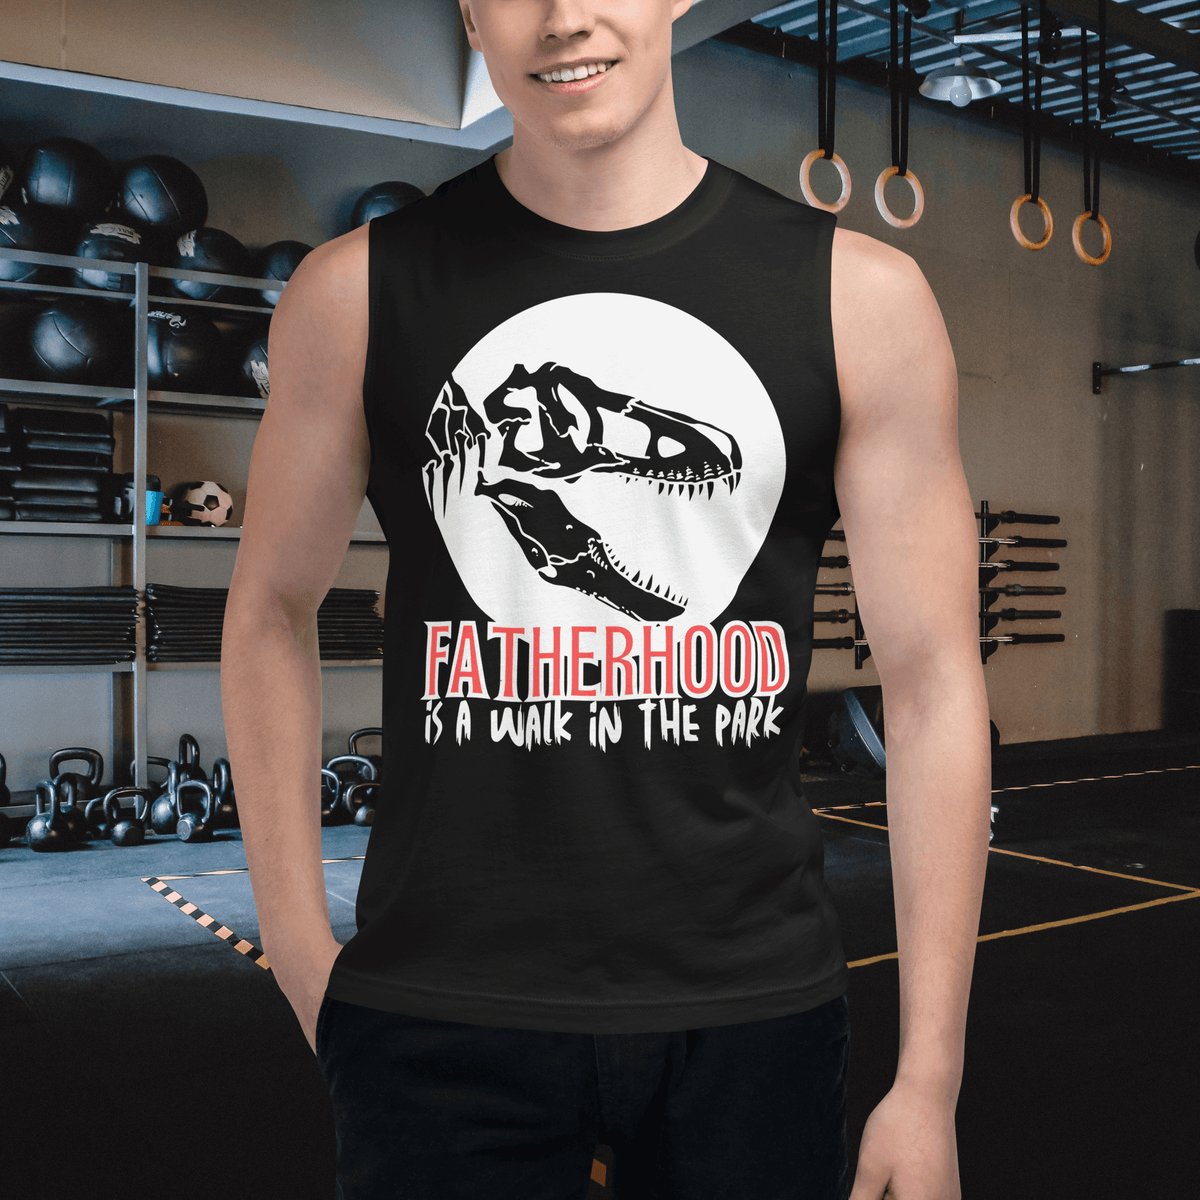 muscle shirt, dinosaur, fatherhood, parenting, family, dad life, sleeveless tee, graphic design, father's day, dad gift, comfortable, unique slogan, casual wear, prehistoric, adventure, fun, dad pride, stylish, soft fabric, conversation starter, fatherhood is a walk in the park tee